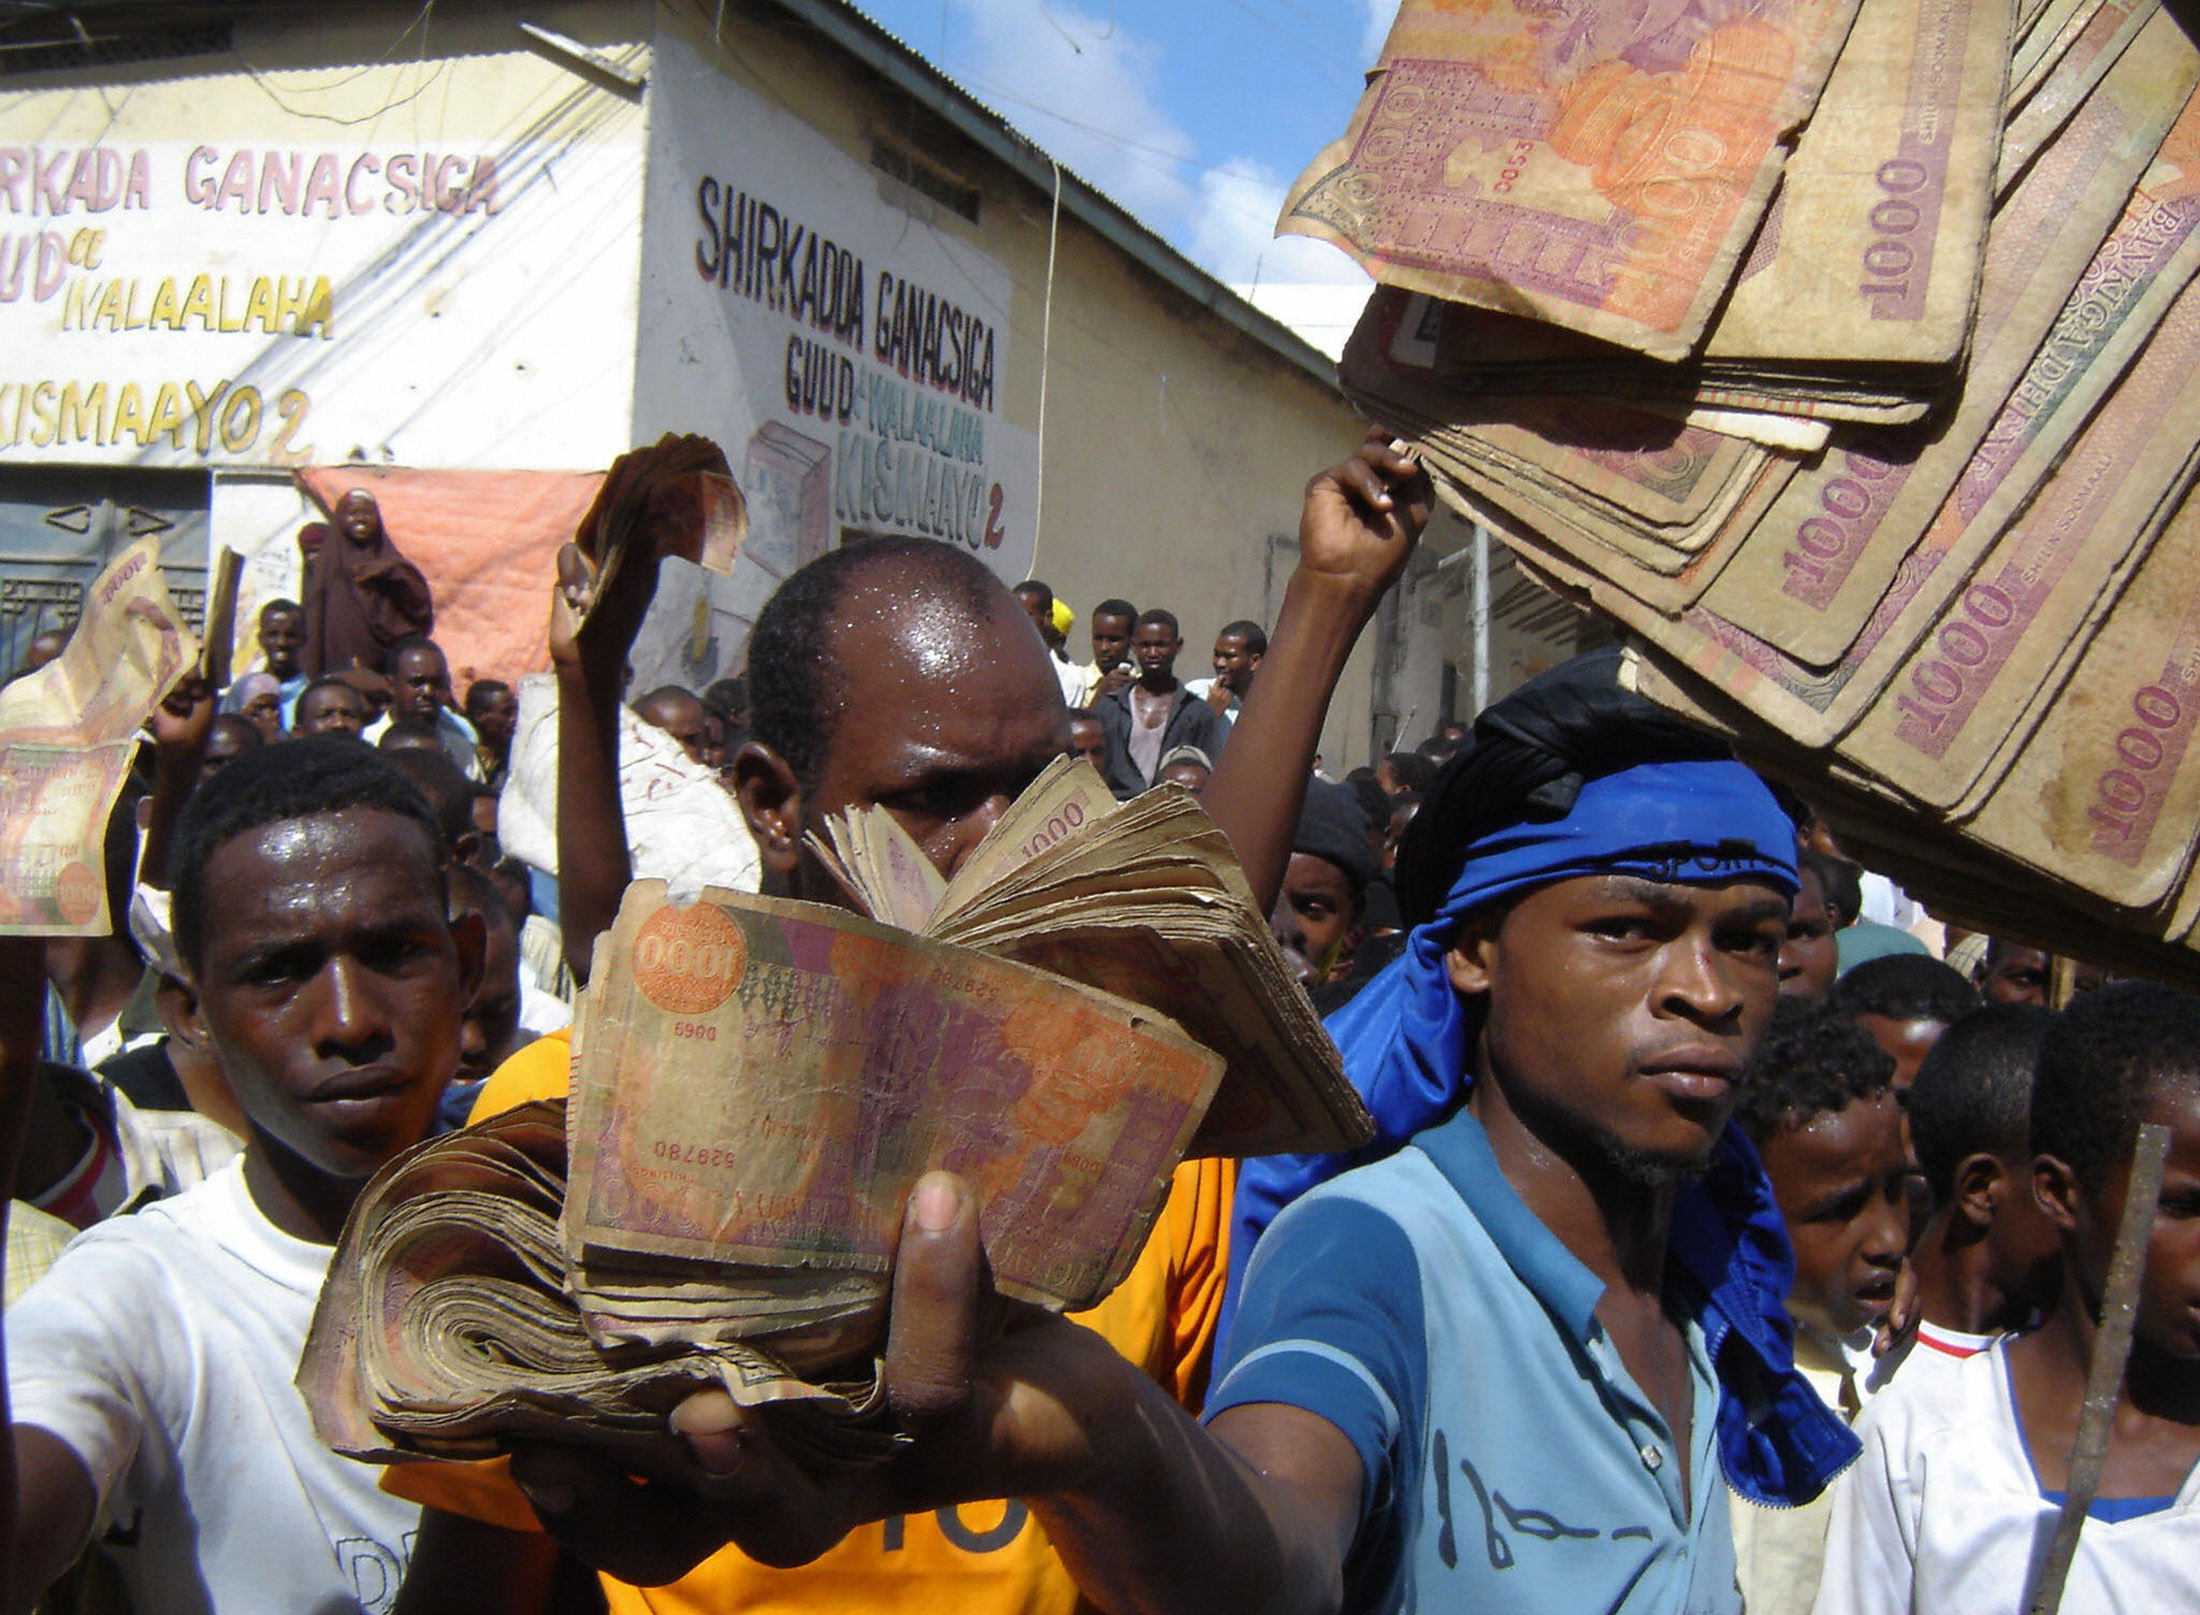 A crowd carry old notes during a demonstration against record-high inflation on May 5, 2008 in the country's capital, Mogadishu. At least five demonstrators were killed on May 5, when Somali security forces fired at crowds protesting rising food prices in Mogadishu, witnesses said. About 7,000 protestors accused unscrupulous traders of rejecting the Somali shilling in favor of the US dollar, thus pushing inflation to historic heights since the government collapsed 17 years ago. AFP PHOTO/ MUSTAFA ABDI (Photo credit should read MUSTAFA ABDI/AFP/Getty Images)
